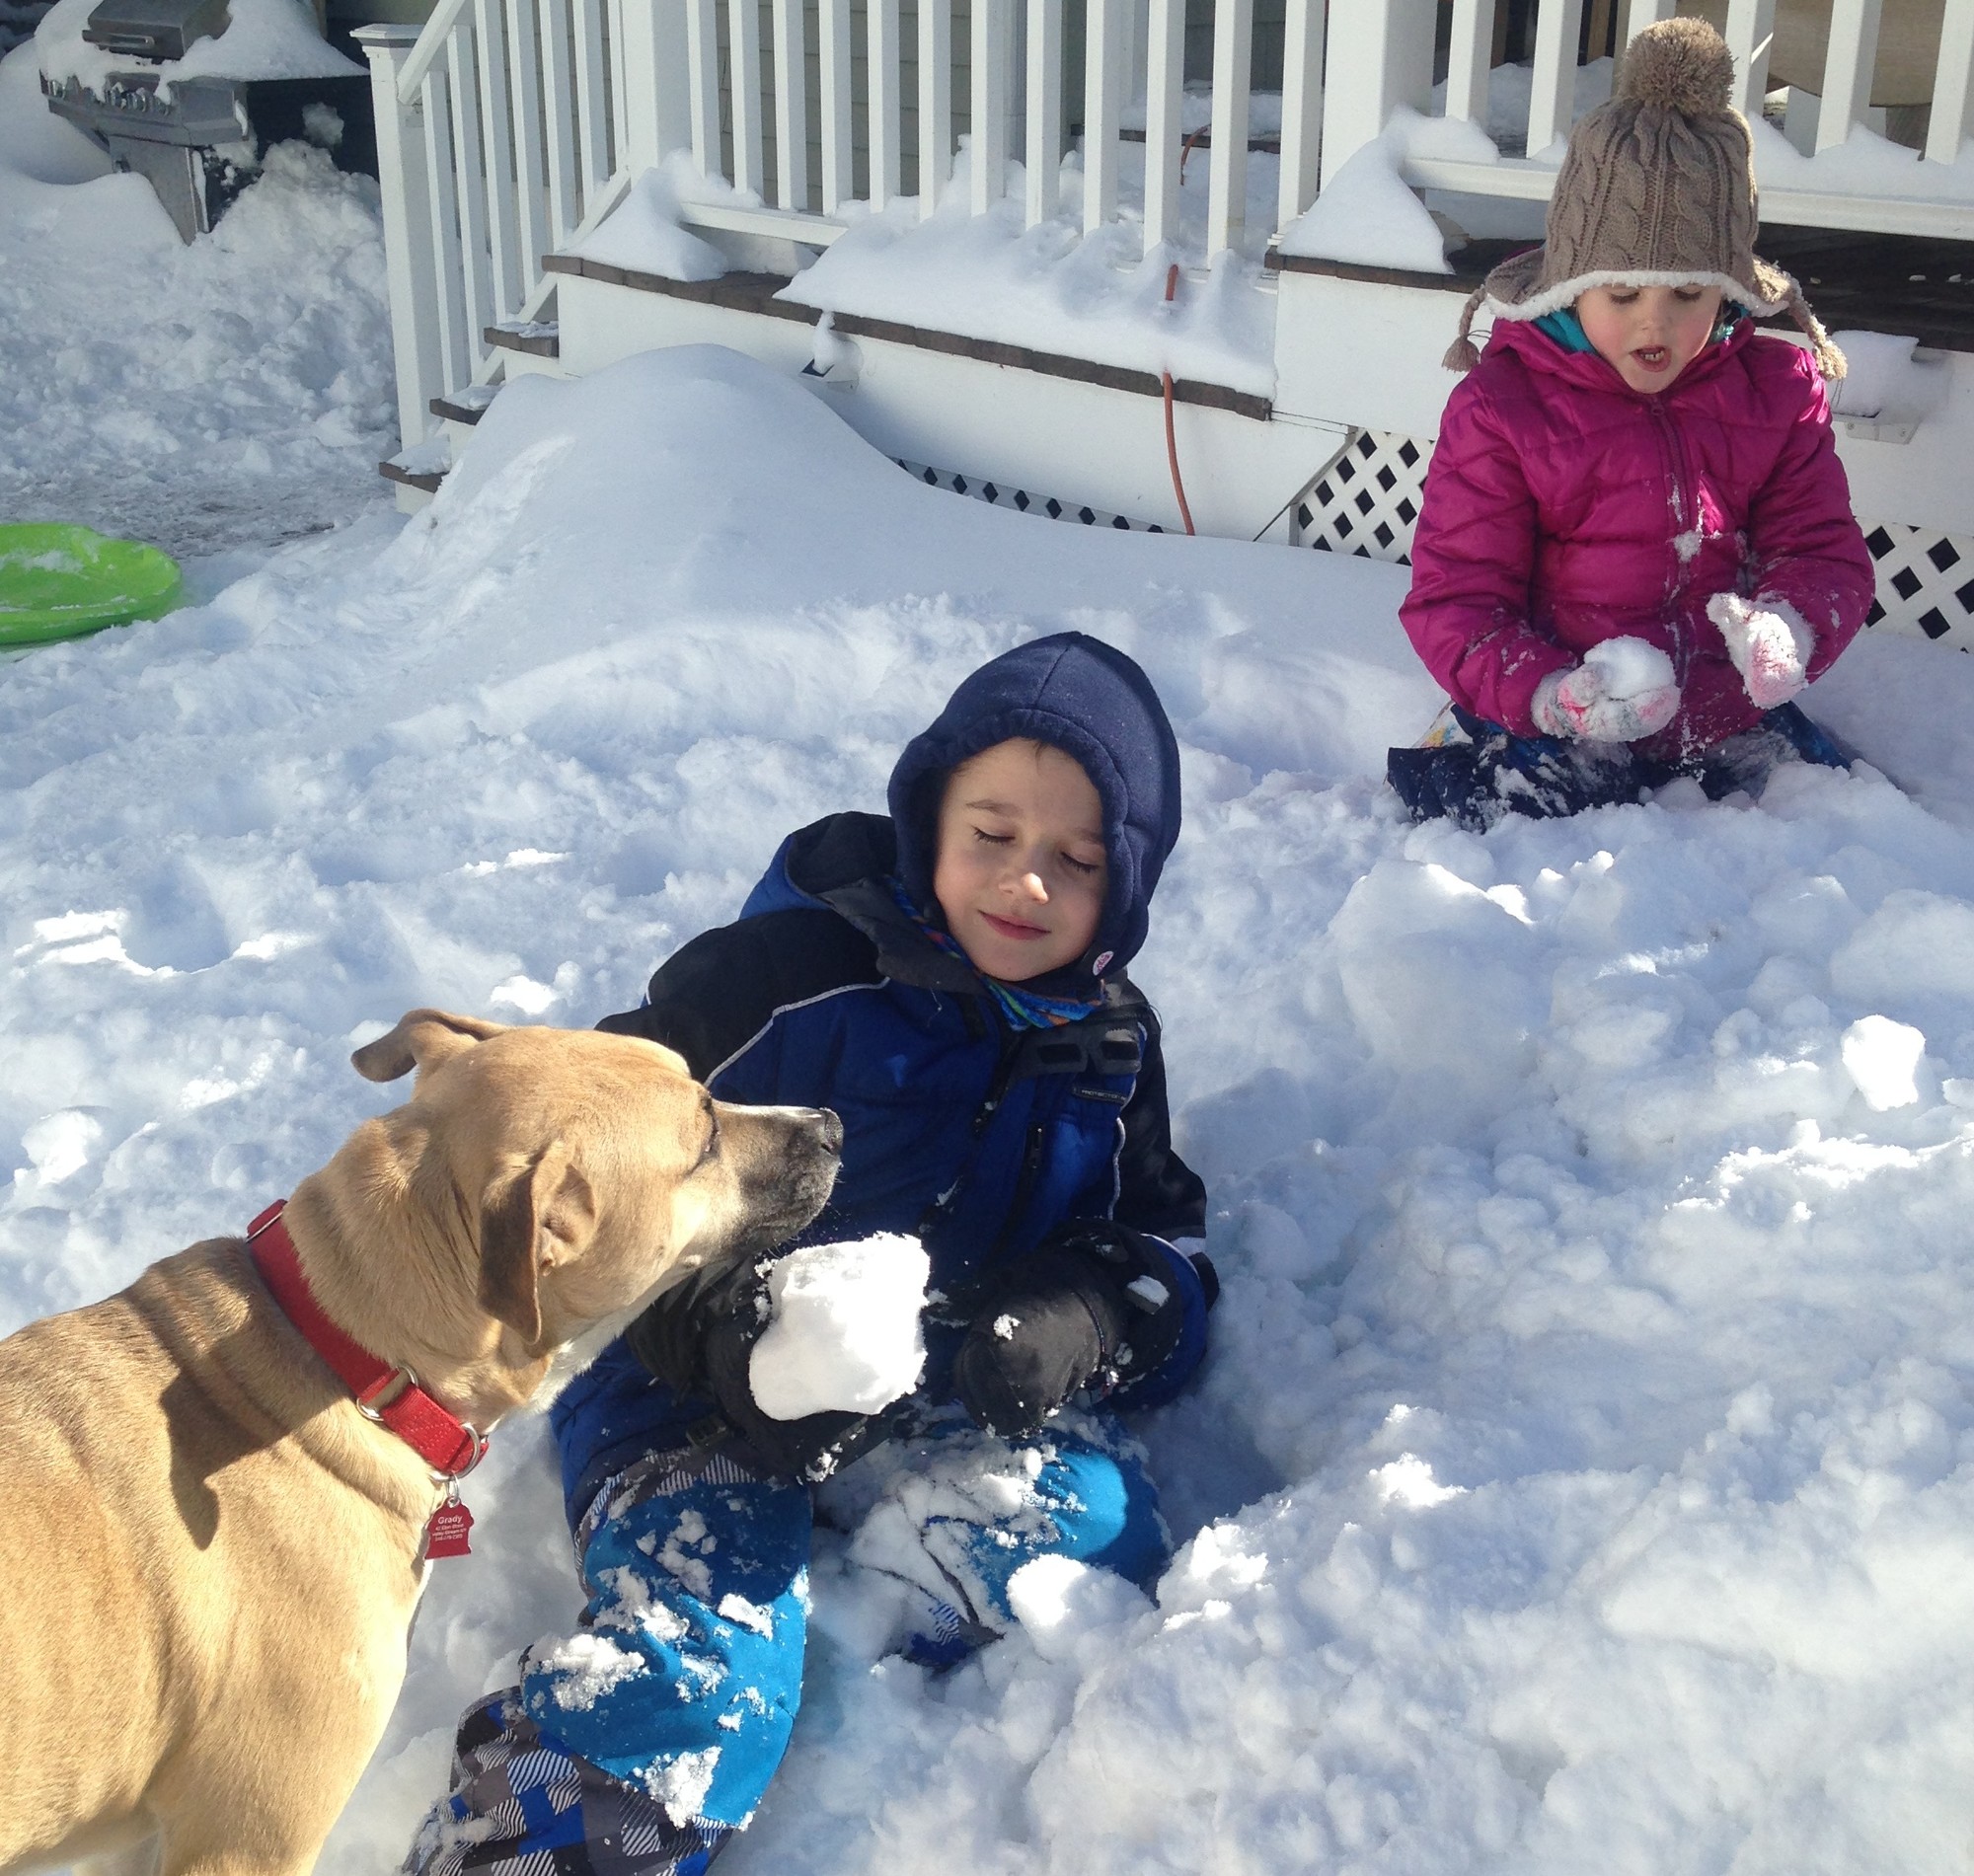 Siblings Ethan Lahey, 7, and Riley, 5, enjoyed the snow with the family dog, Grady.